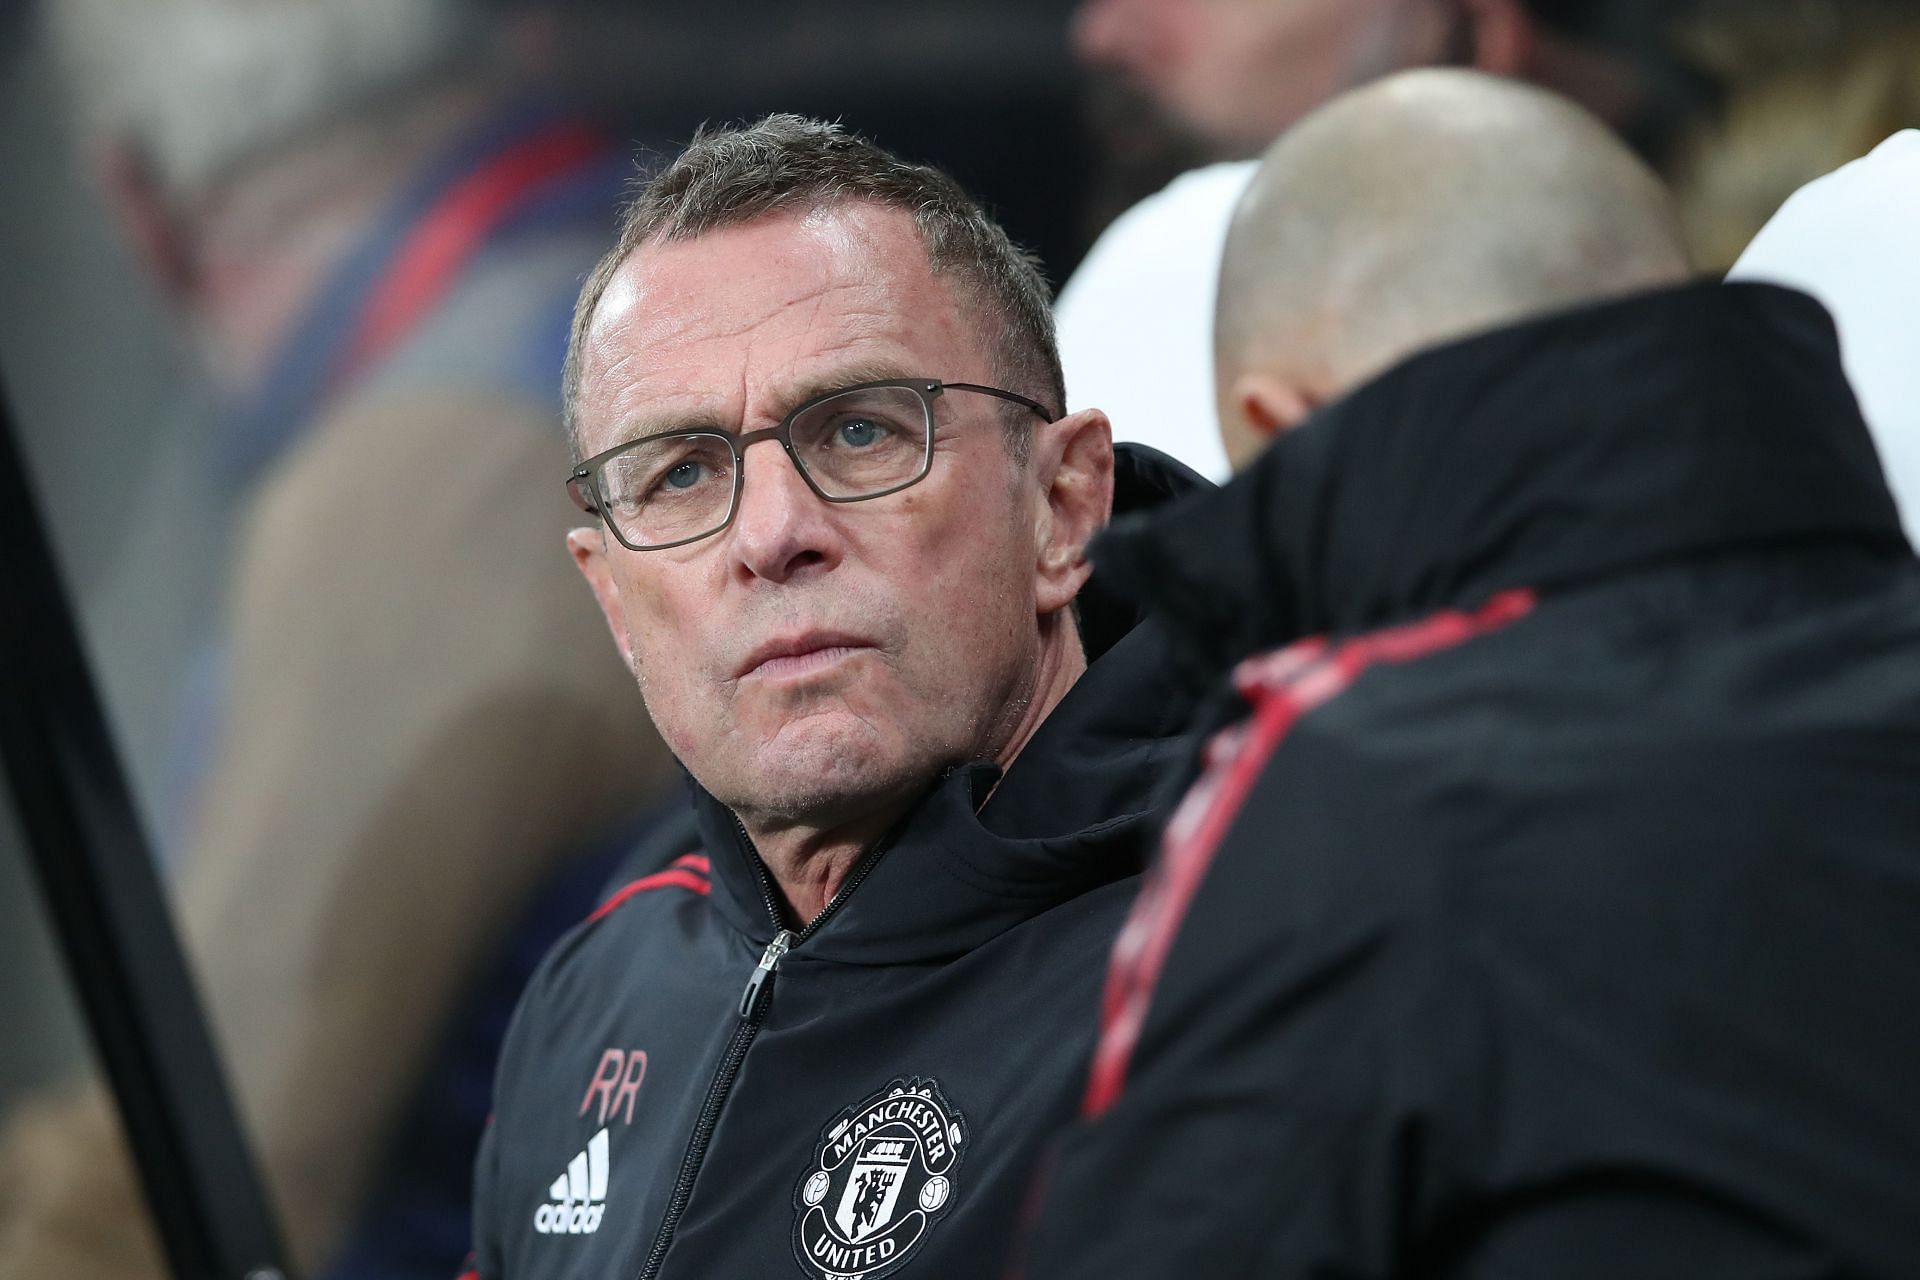 De Jong believes Ralf Rangnick will struggle getting Manchester United into the top 4